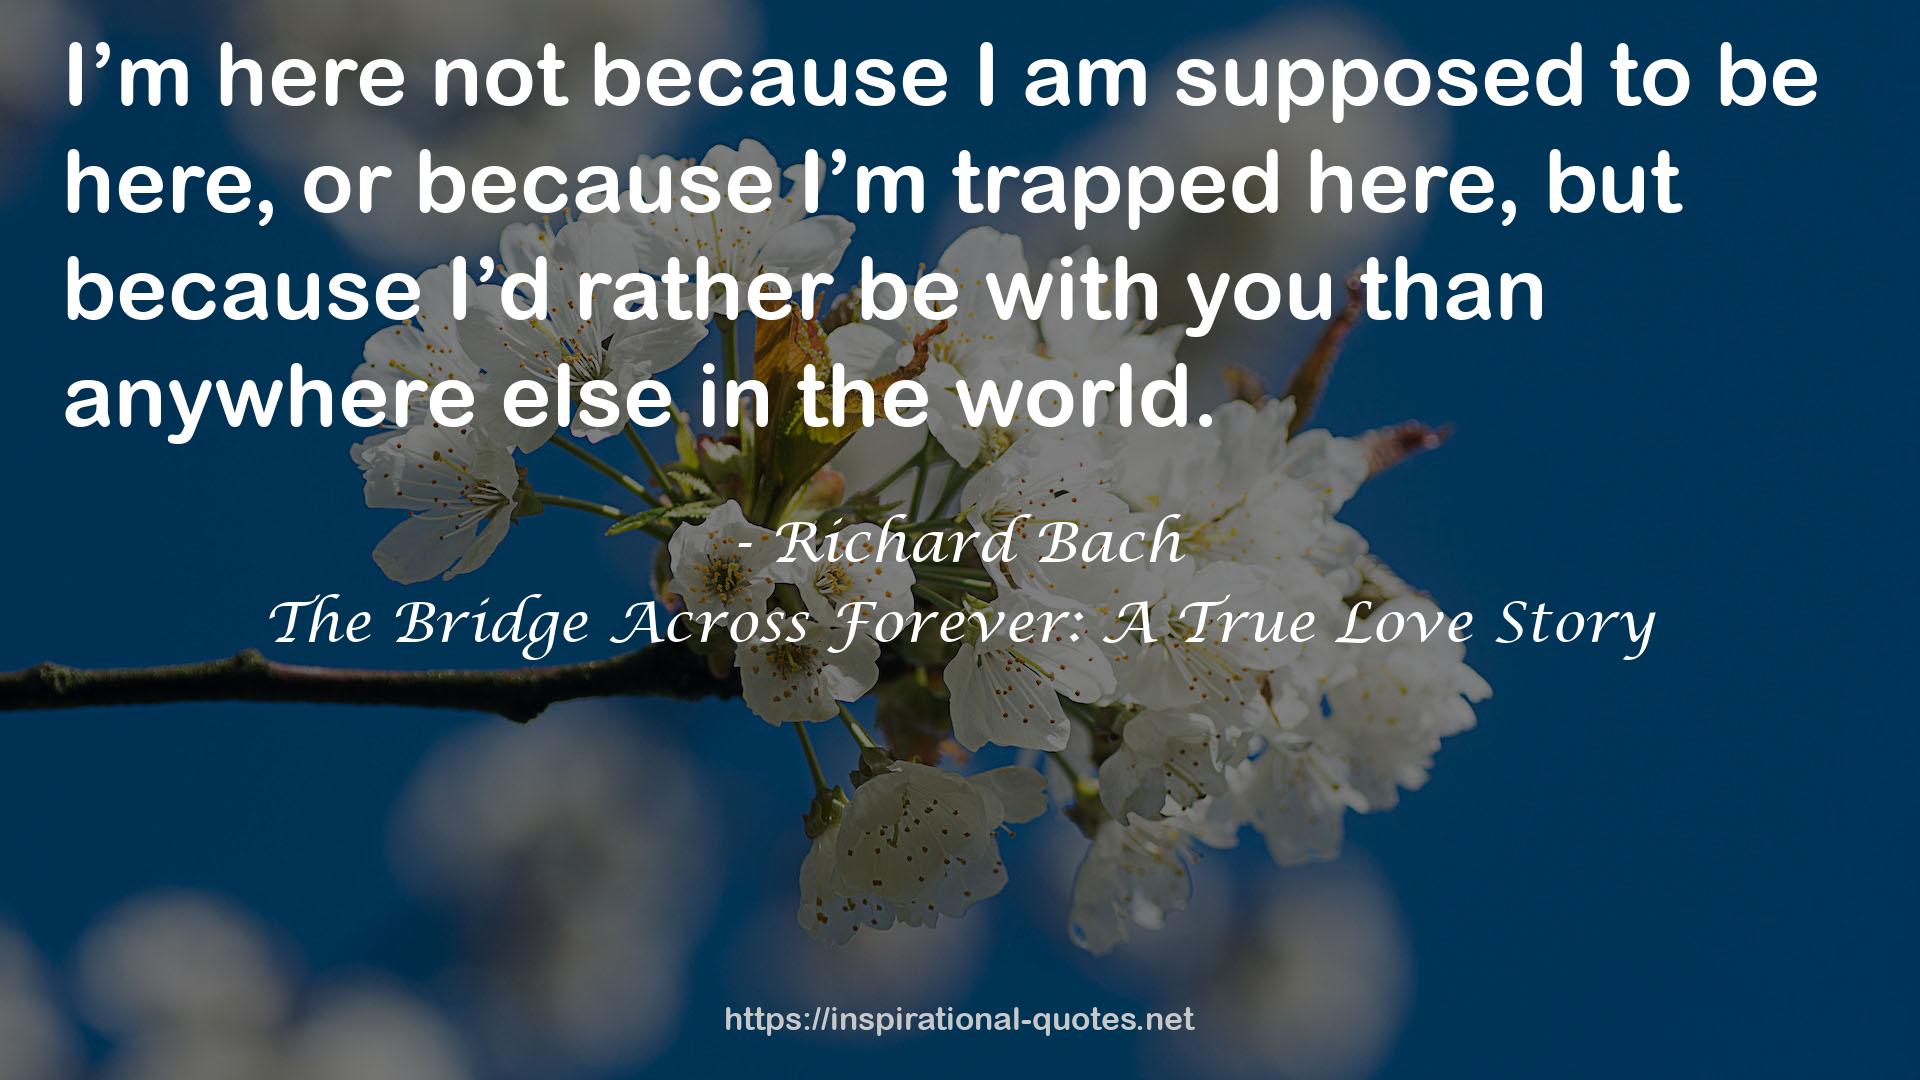 Richard Bach QUOTES